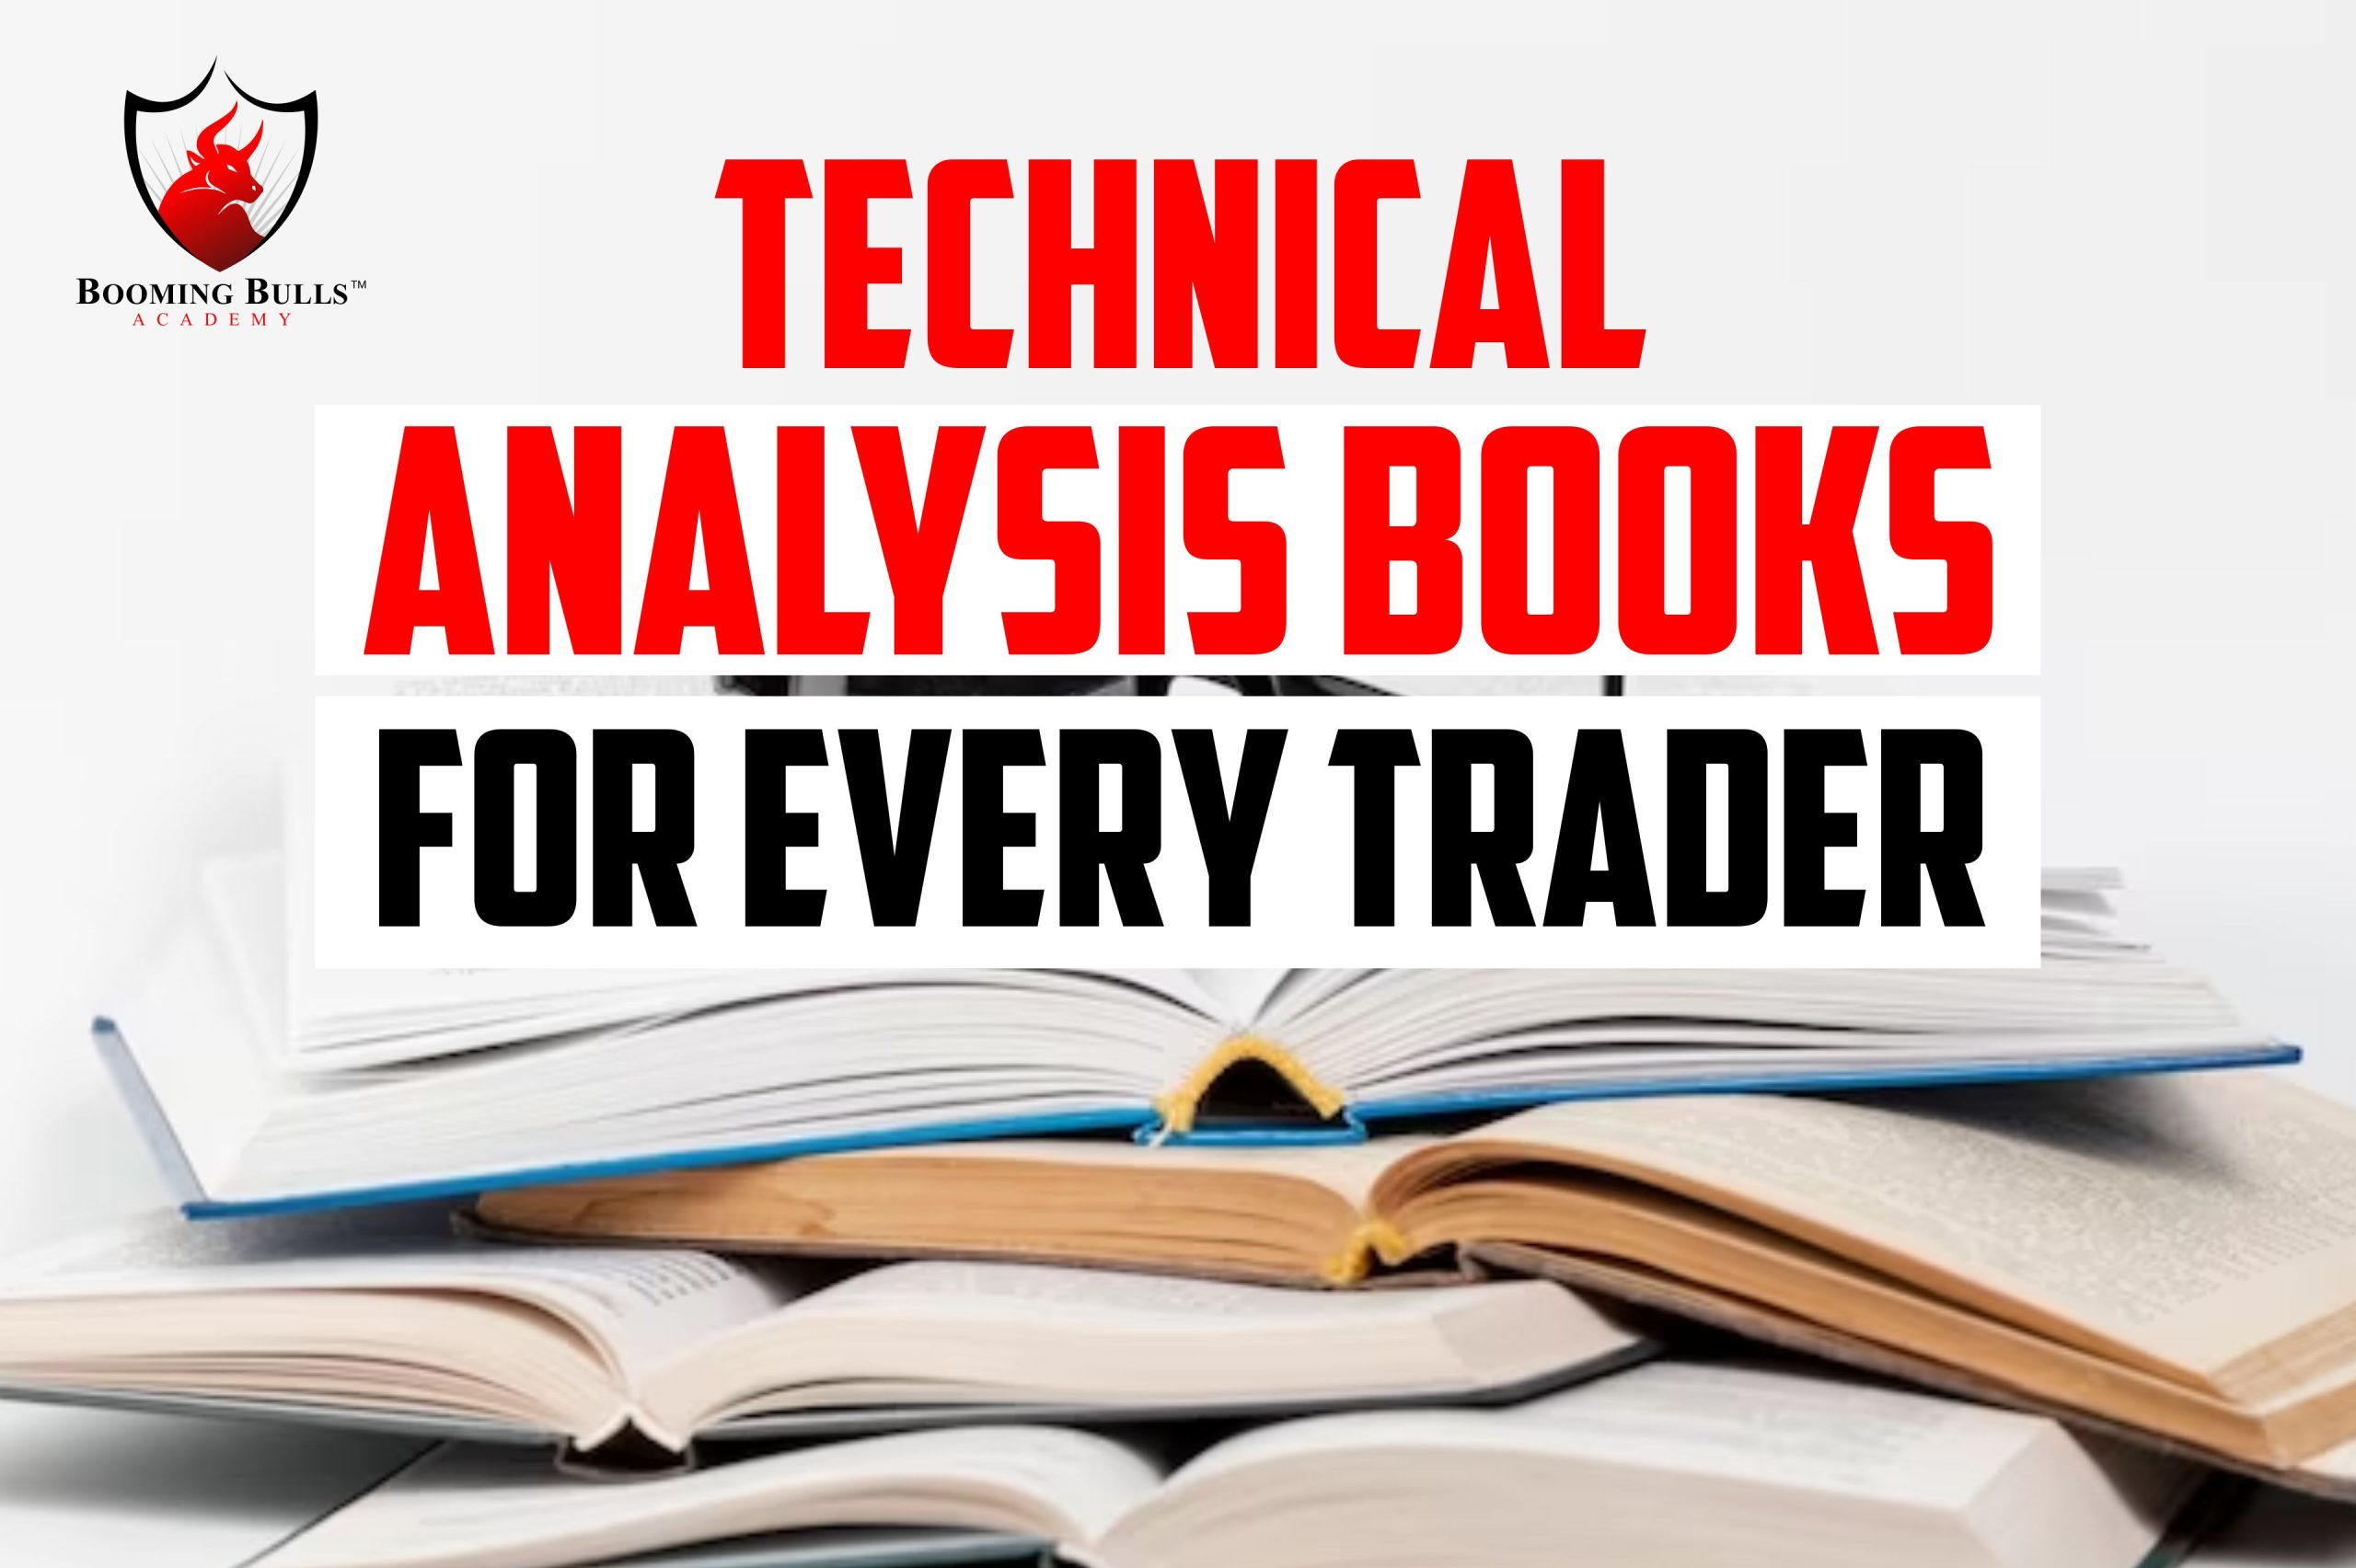 Technical Analysis Books for Every Trader